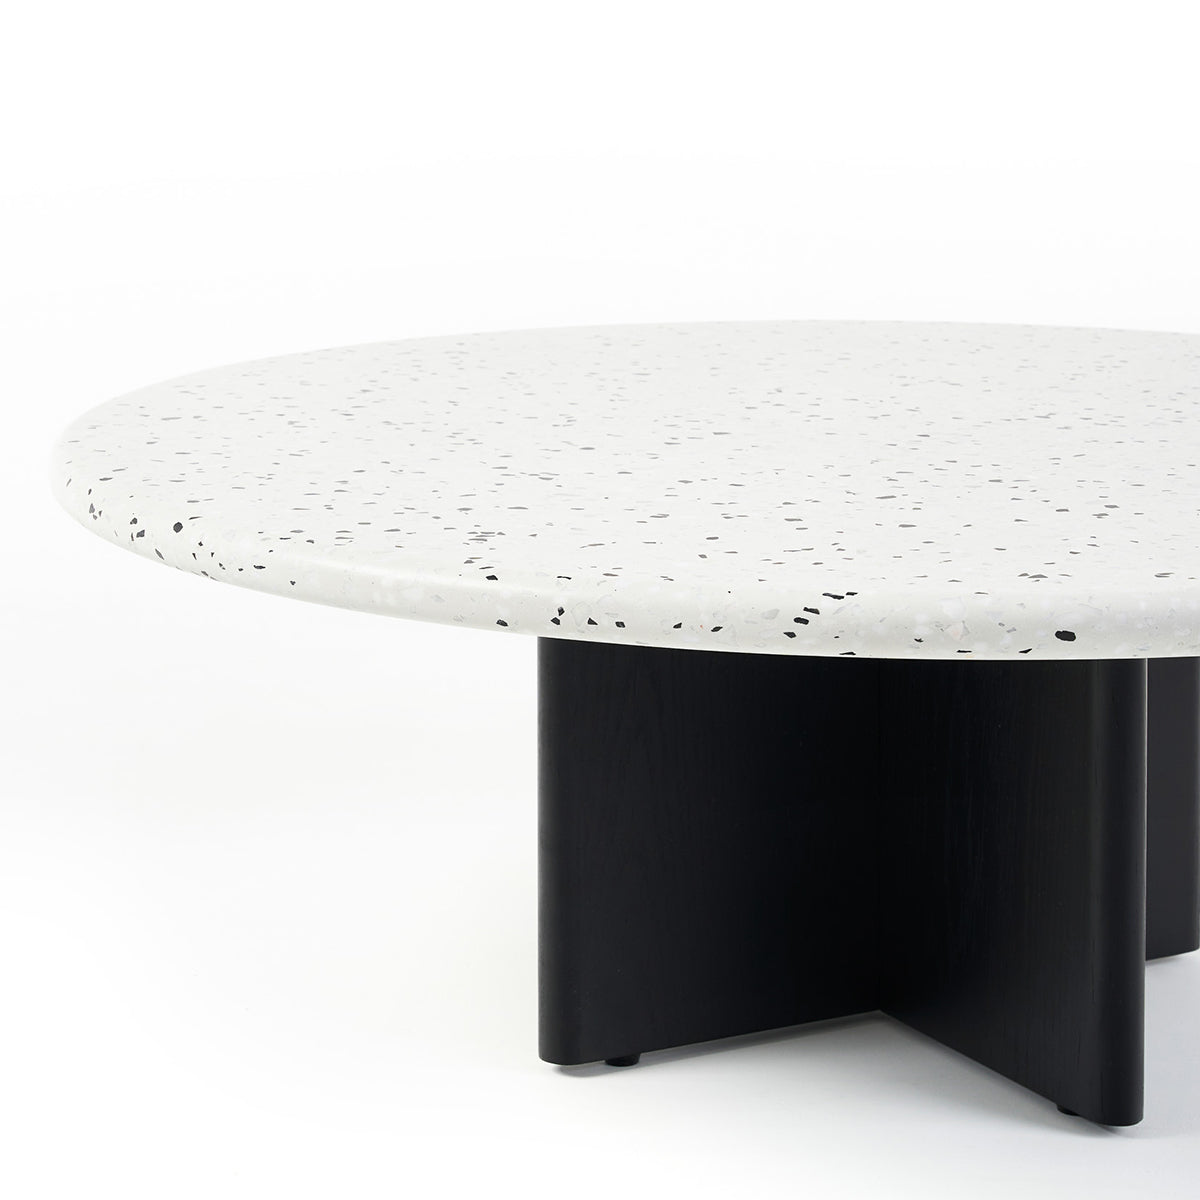 Maybelle Coffee Table (Black/White Terrazzo).